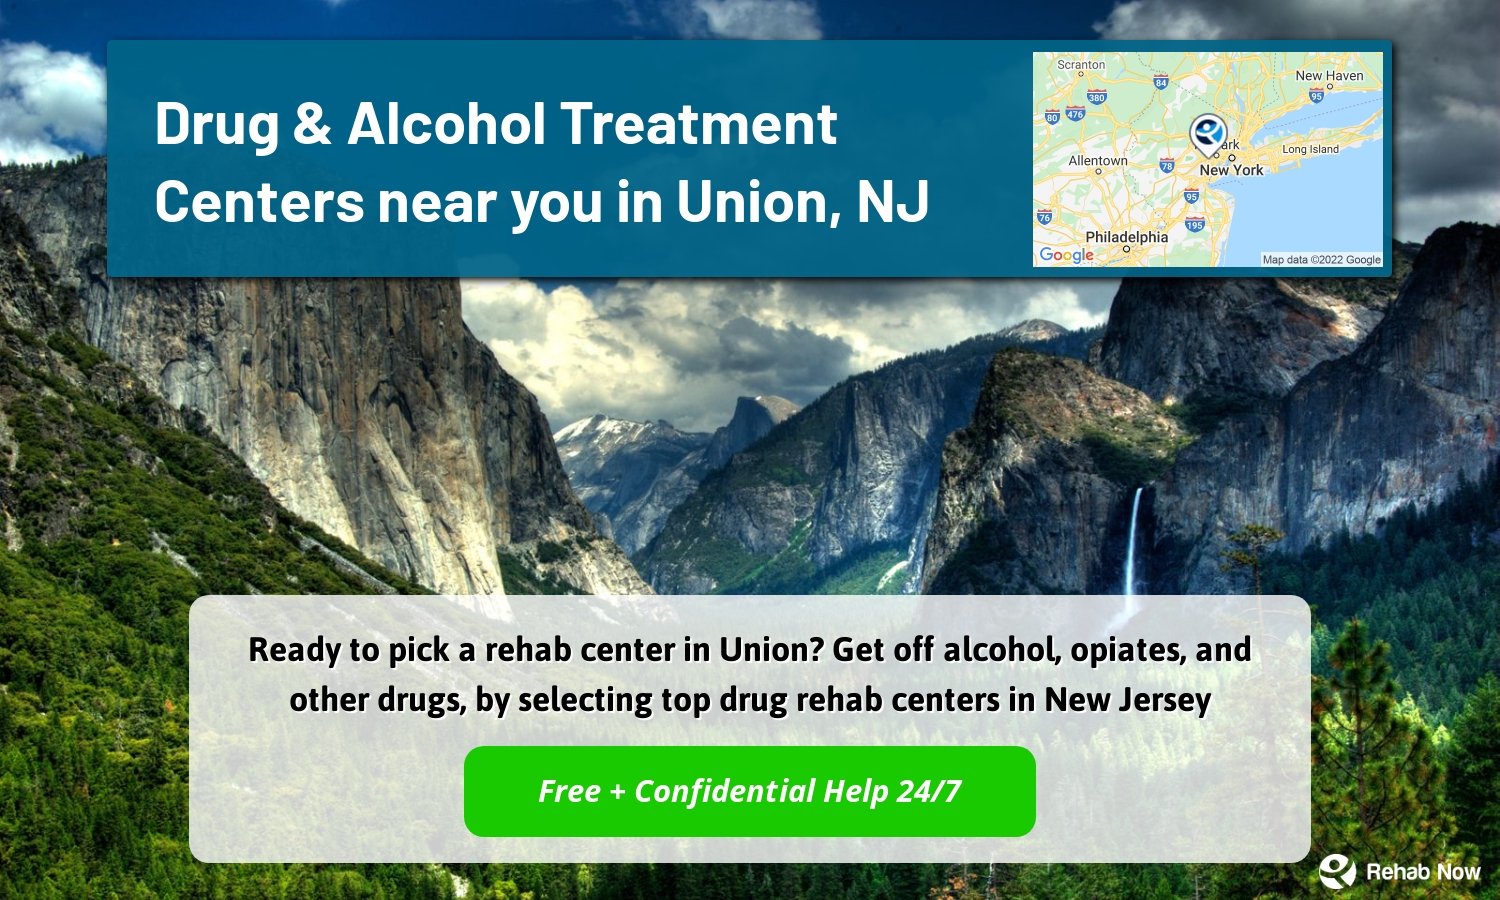 Ready to pick a rehab center in Union? Get off alcohol, opiates, and other drugs, by selecting top drug rehab centers in New Jersey